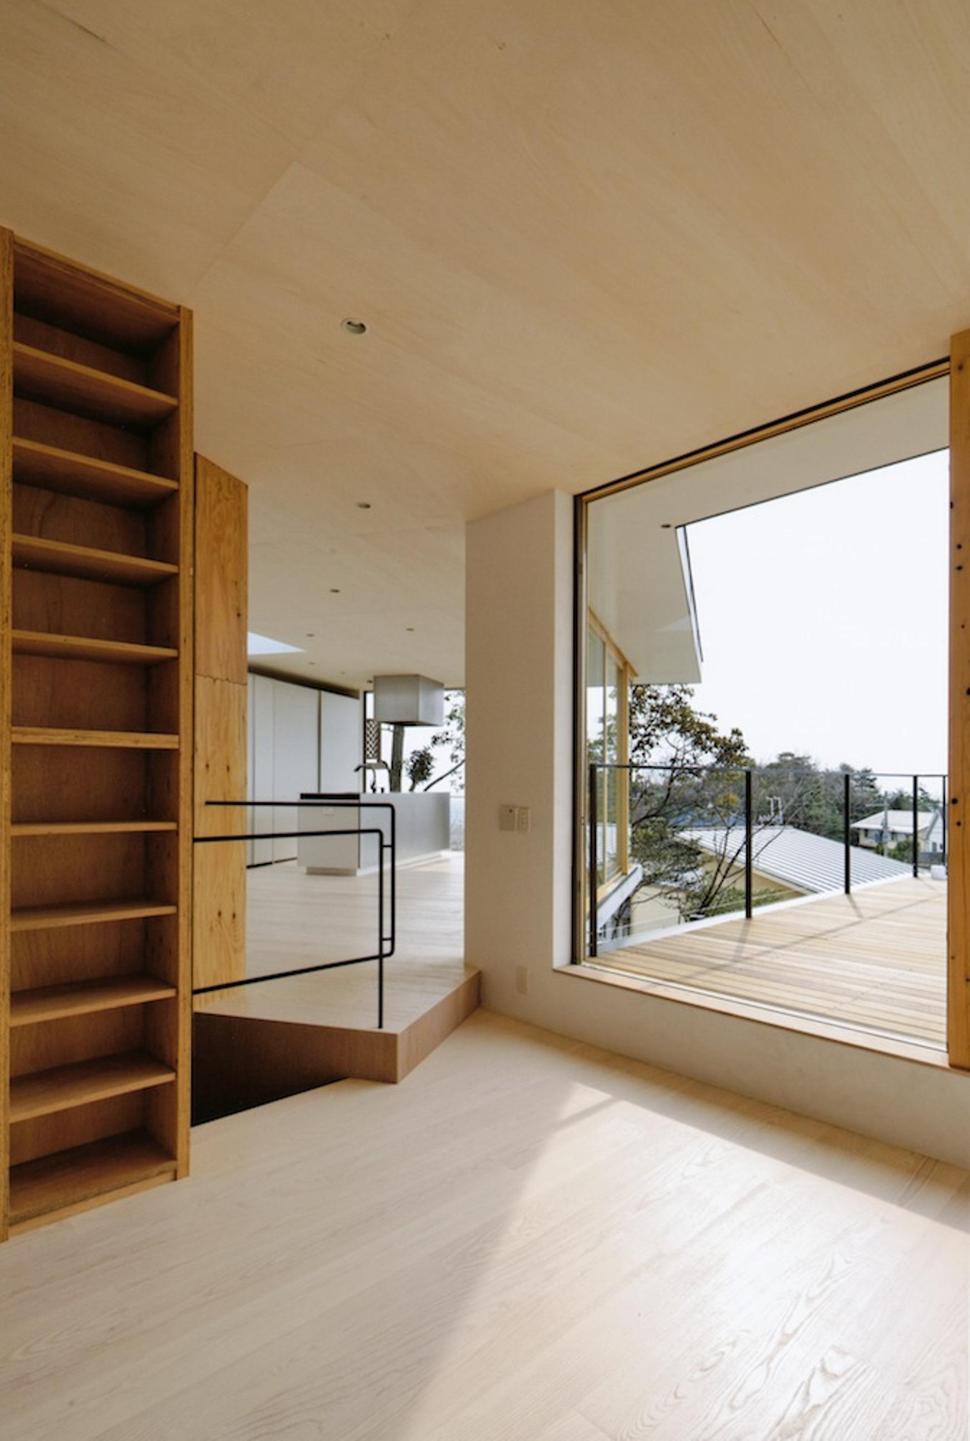 steep-slope-house-with-bookshelf-lined-interior-6-step-down.jpg